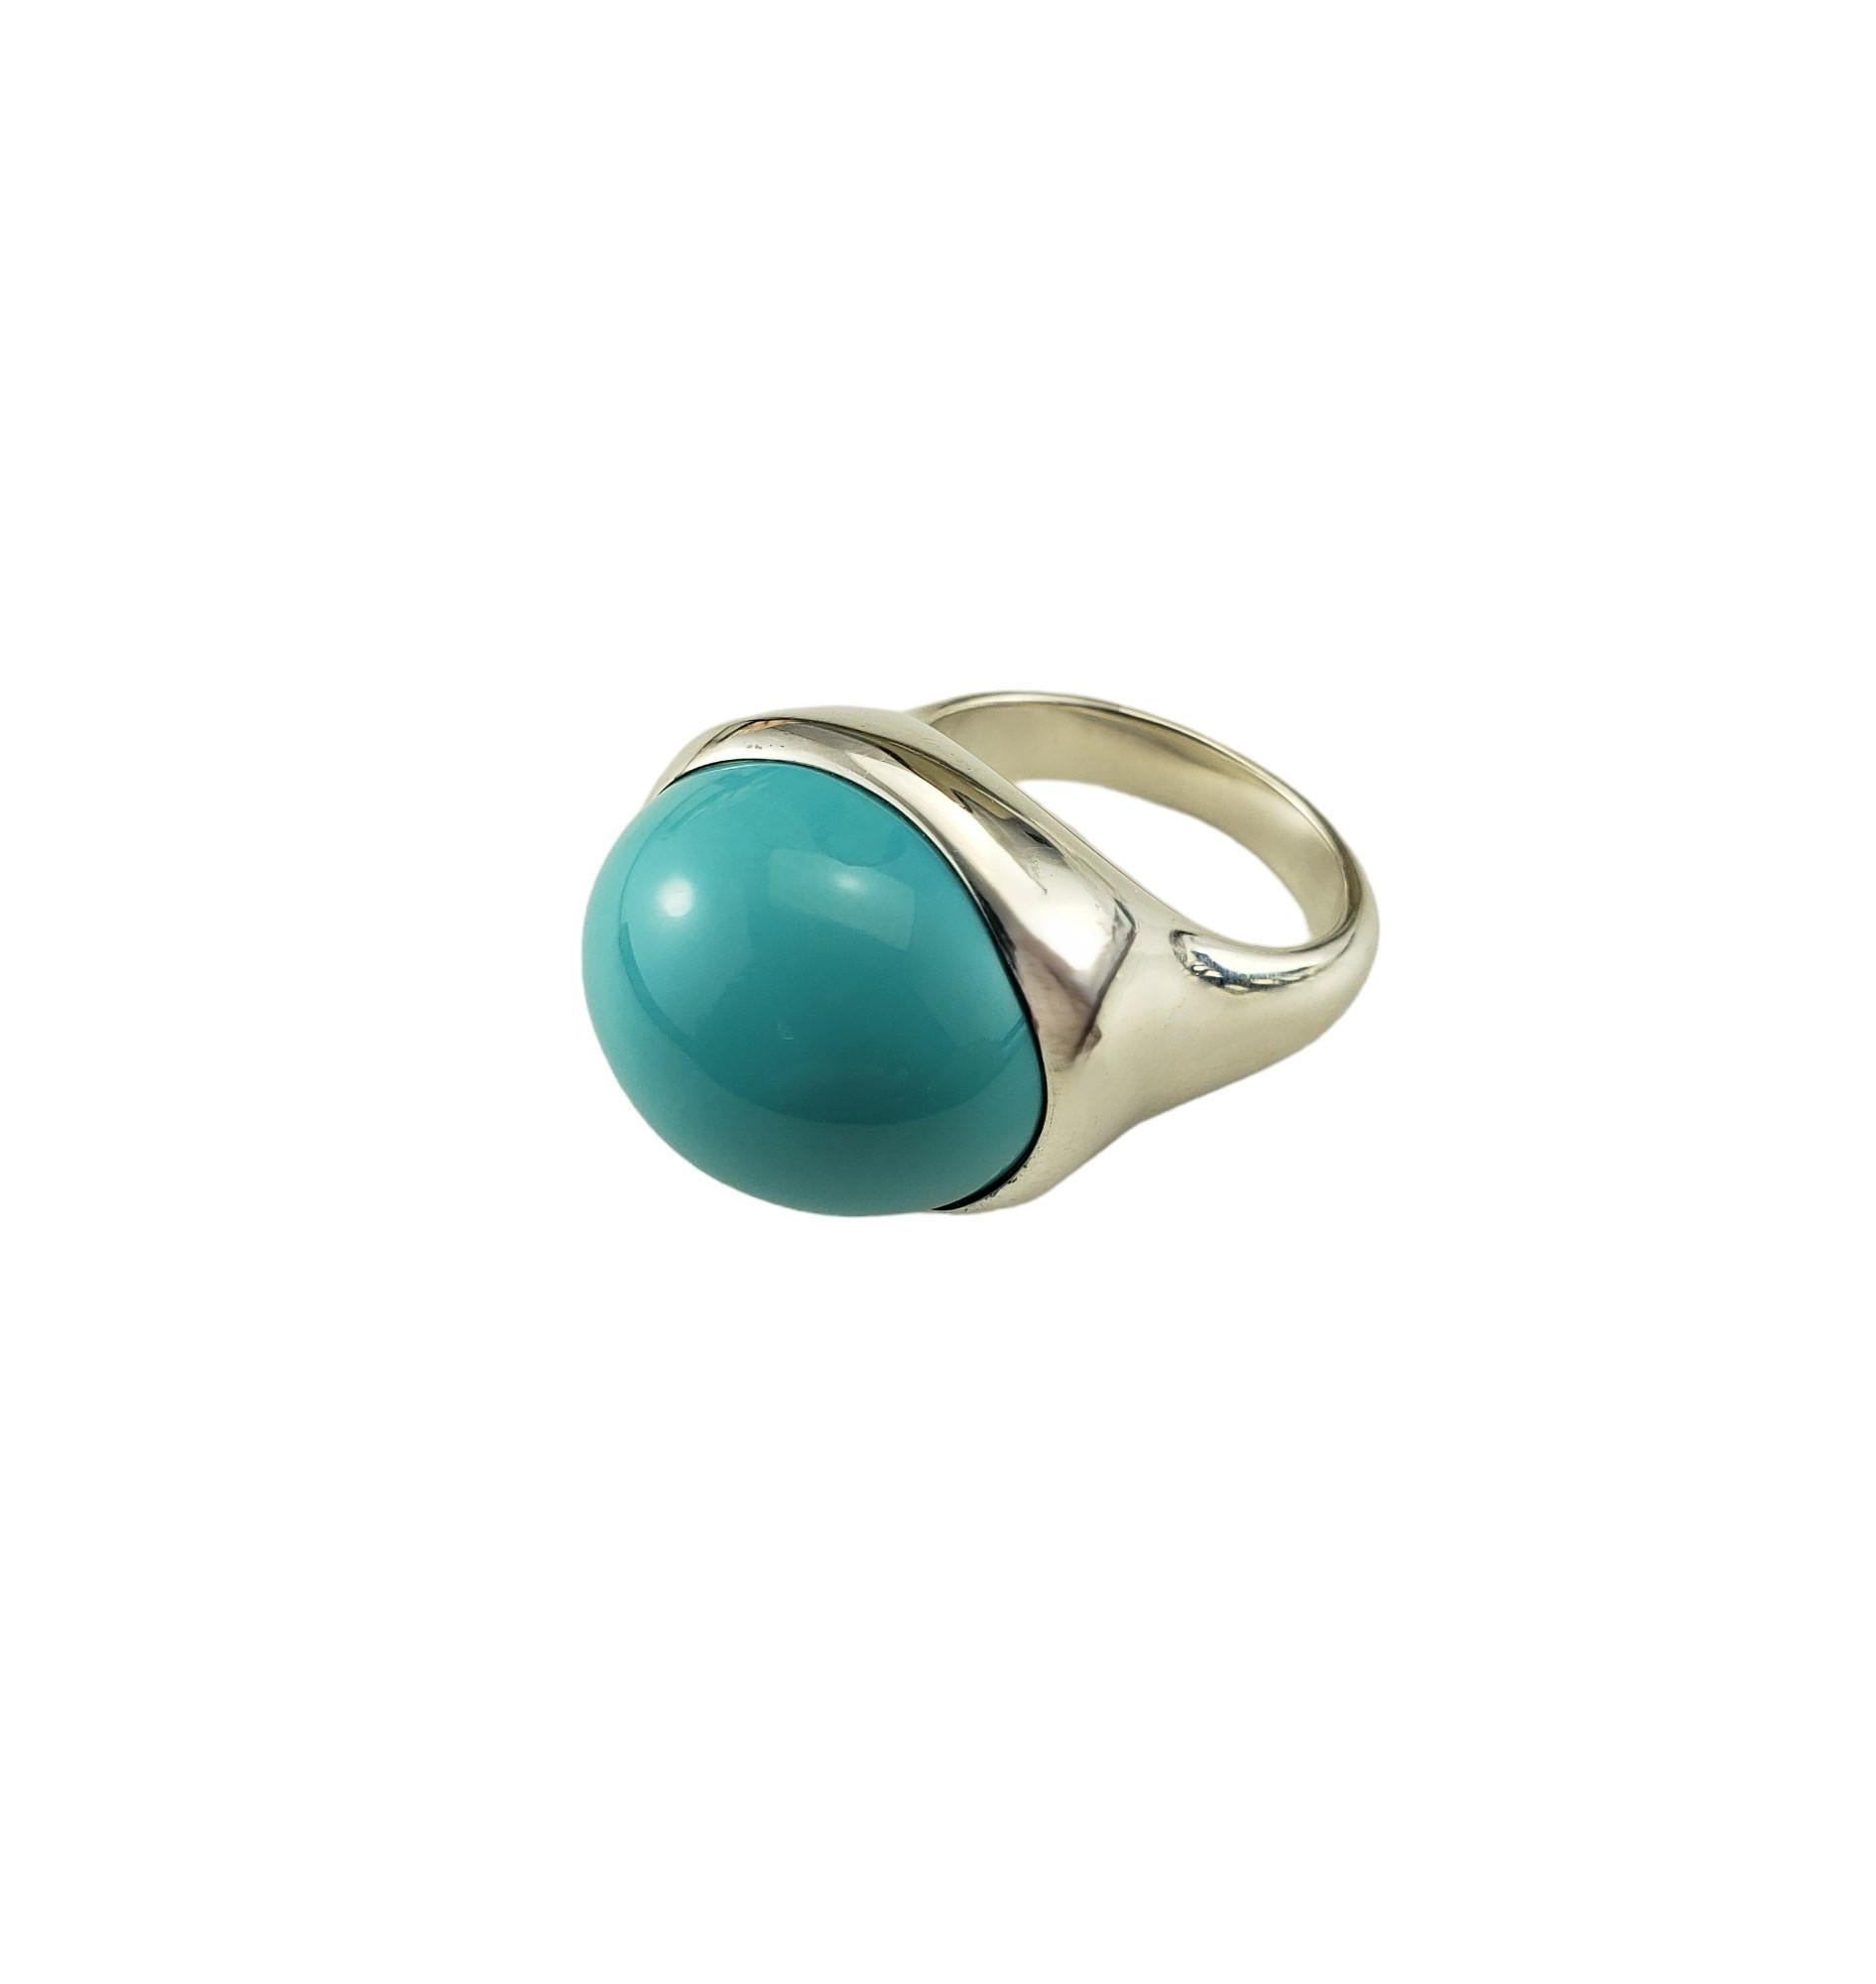 Tiffany & Co. Elsa Peretti Sterling Silver Turquoise Ring Size 8 #17064 In Good Condition For Sale In Washington Depot, CT